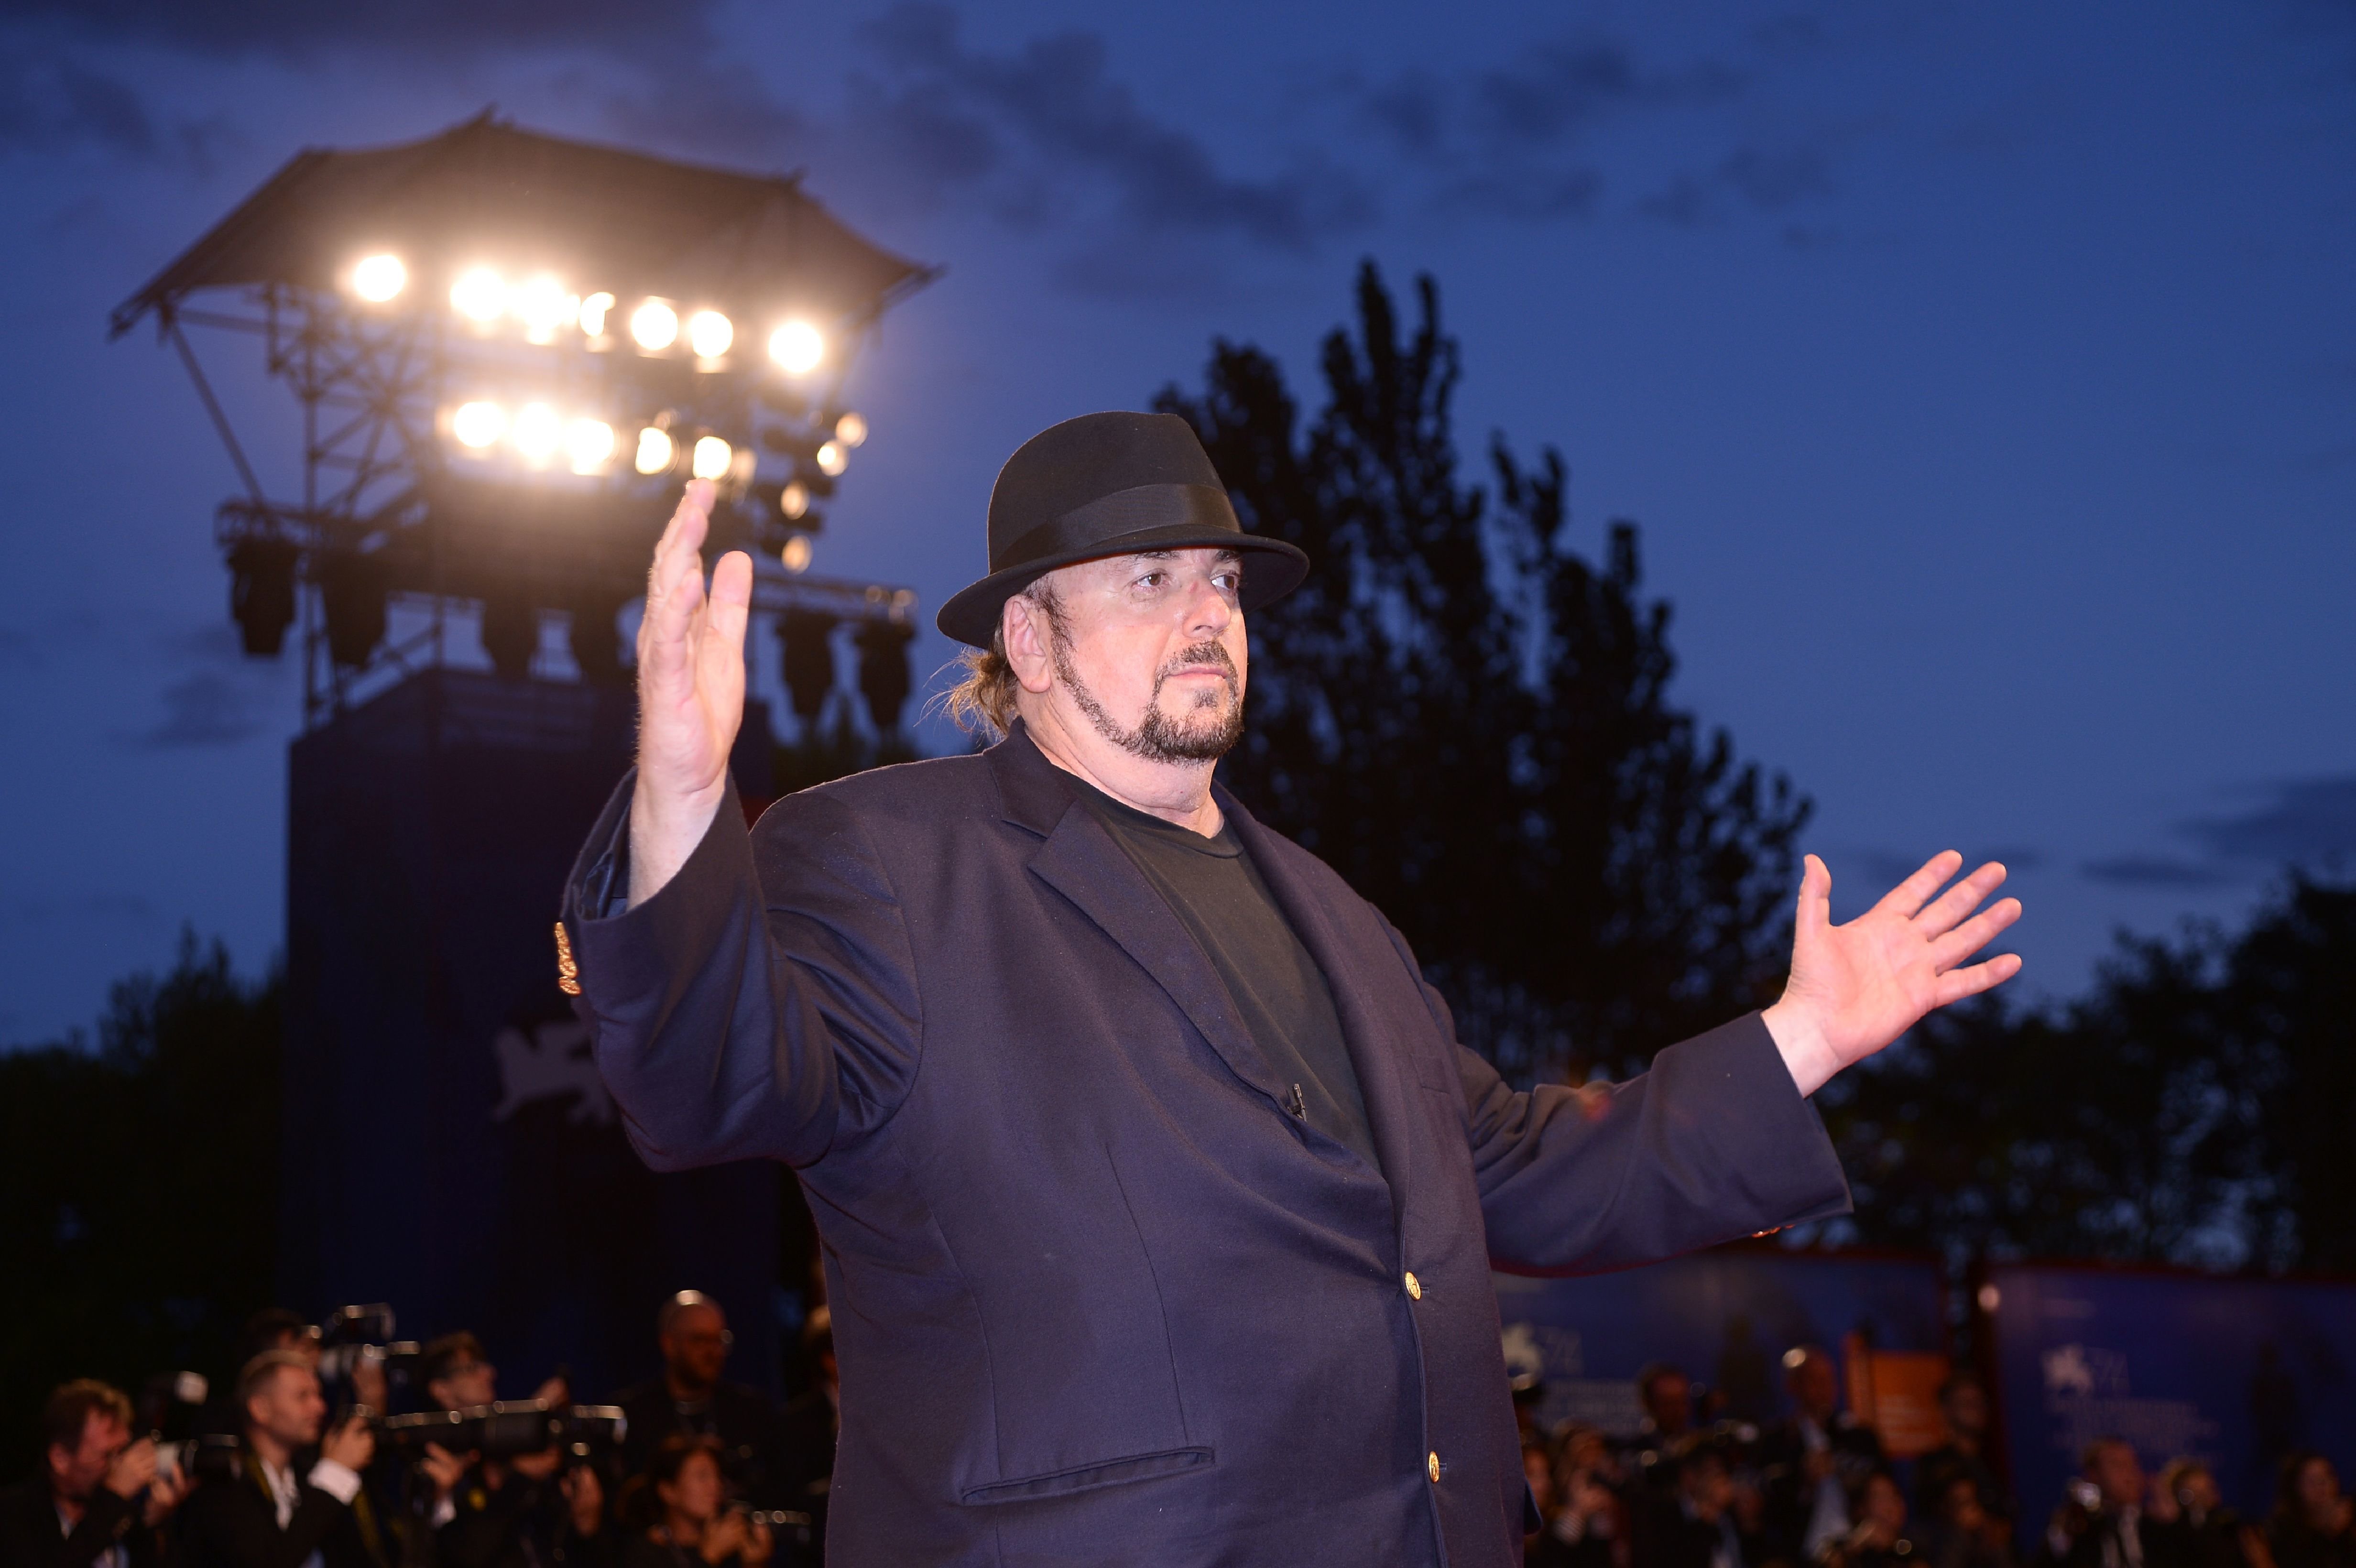 Director James Toback 'accused of sexual harassment by 38 women'